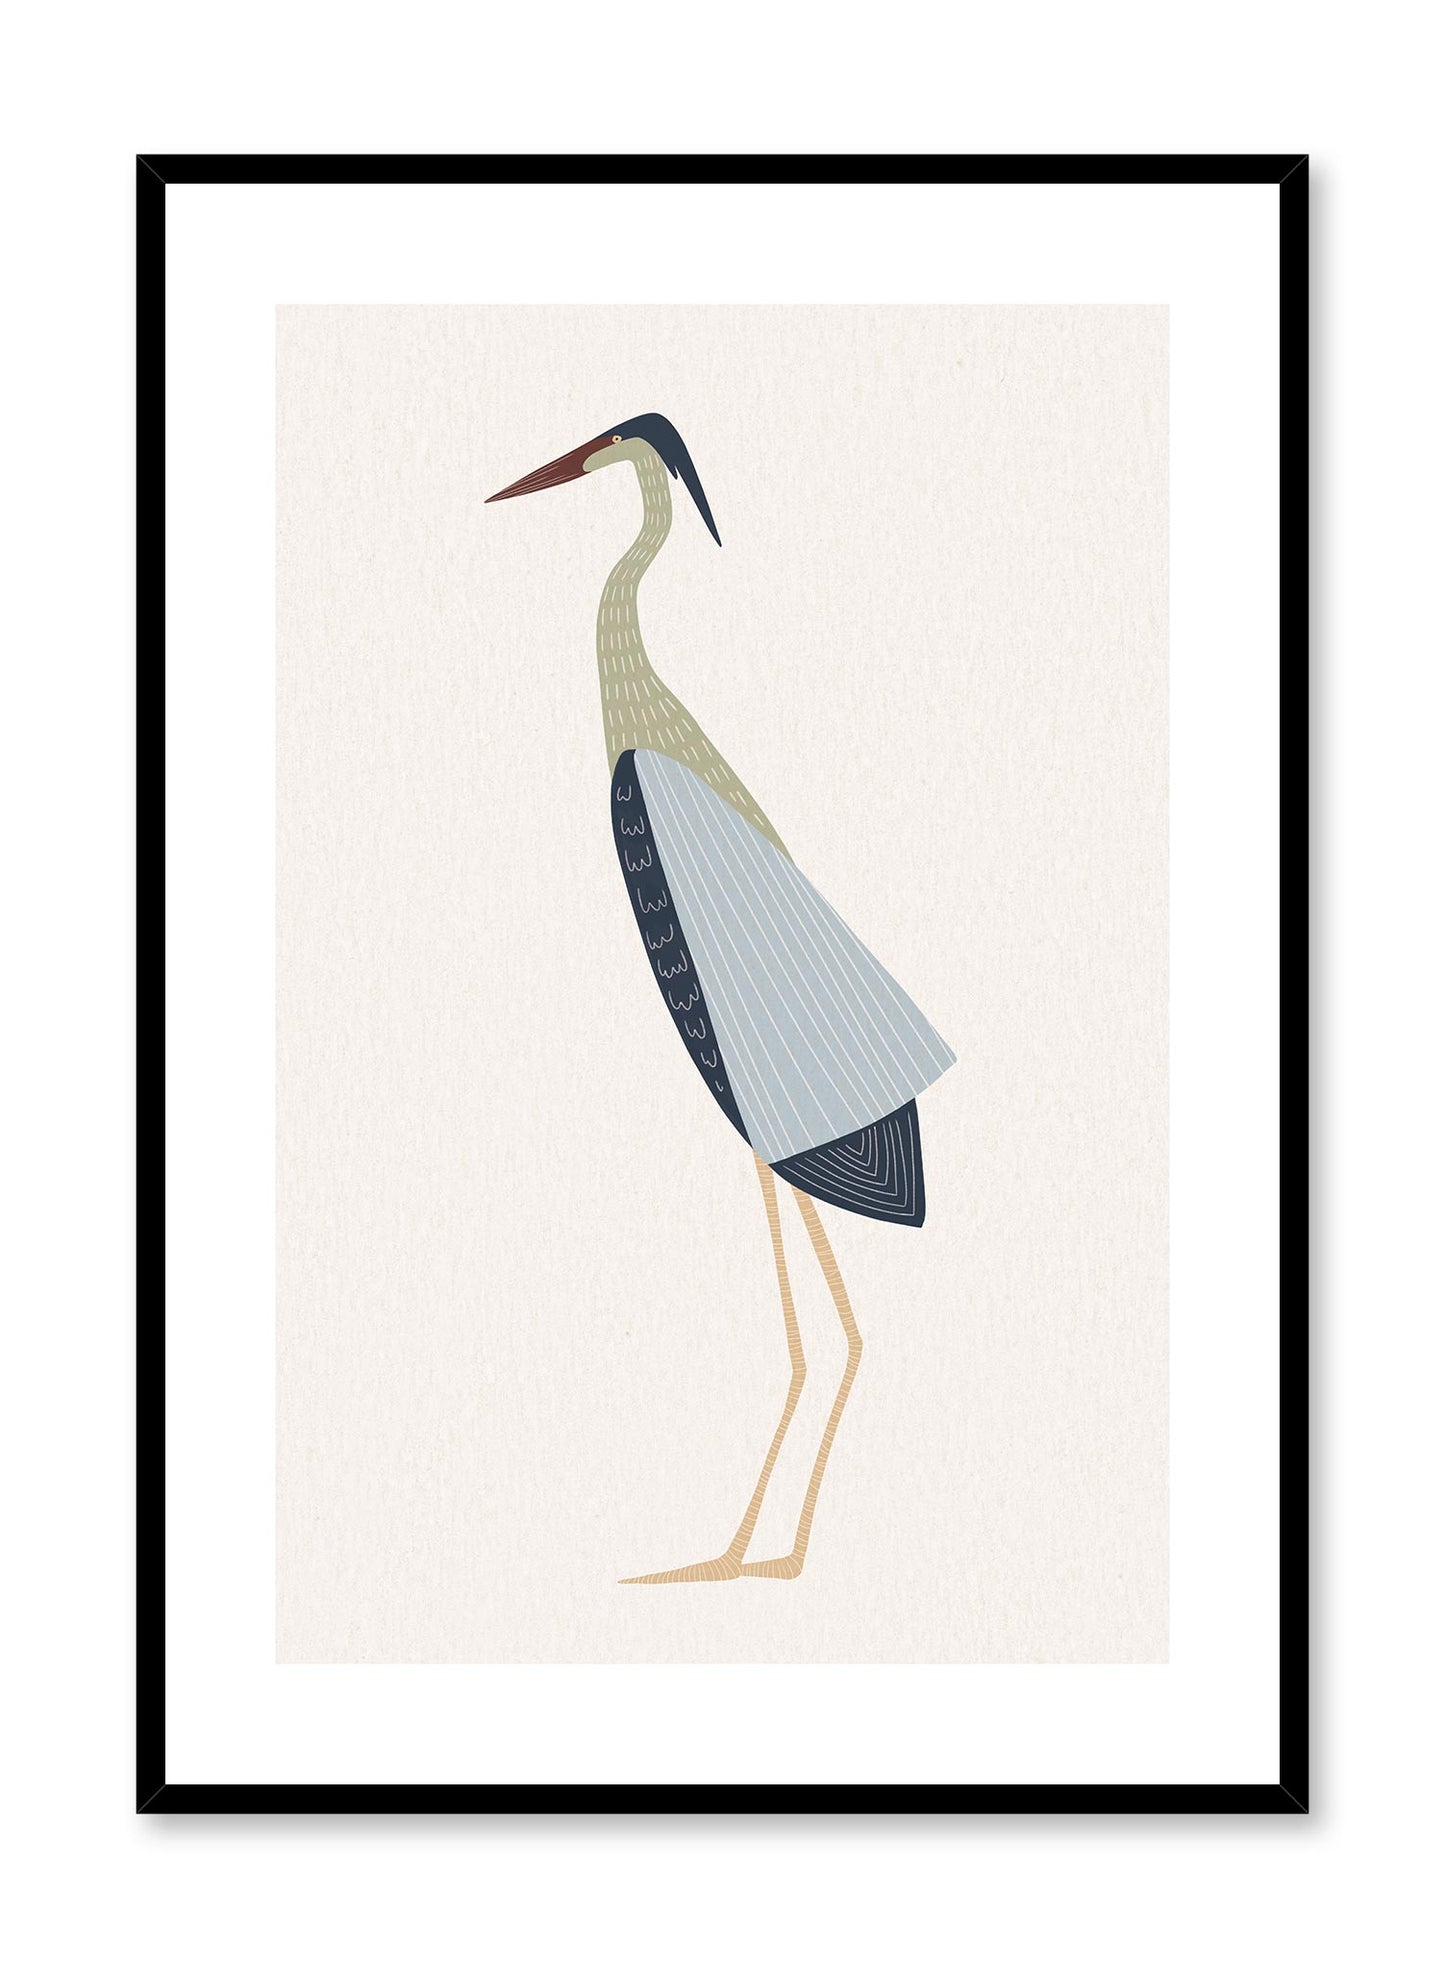 Winged Majesty is a minimalist illustration by Opposite Wall of a red crowned crane standing tall with poise.